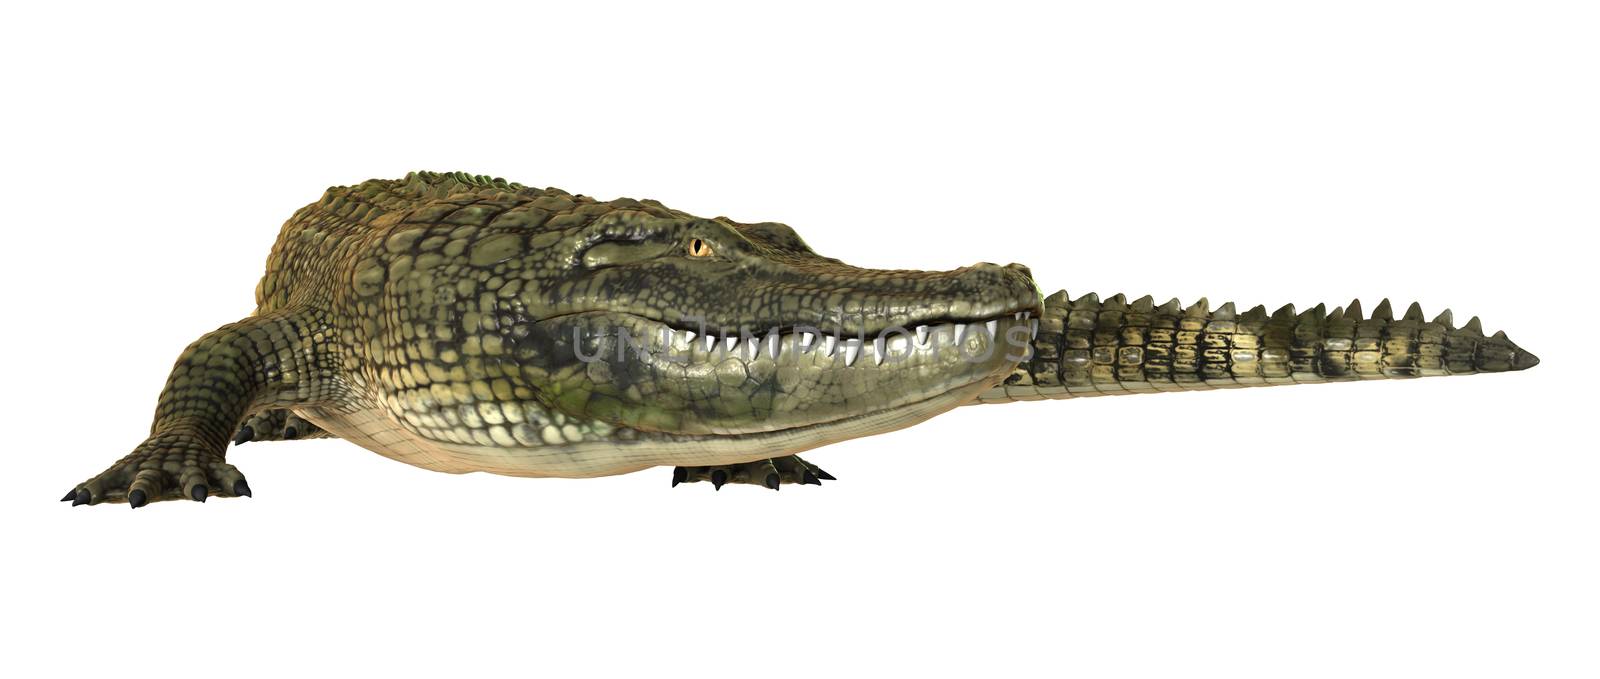 3D digital render of an American alligator isolated on white background